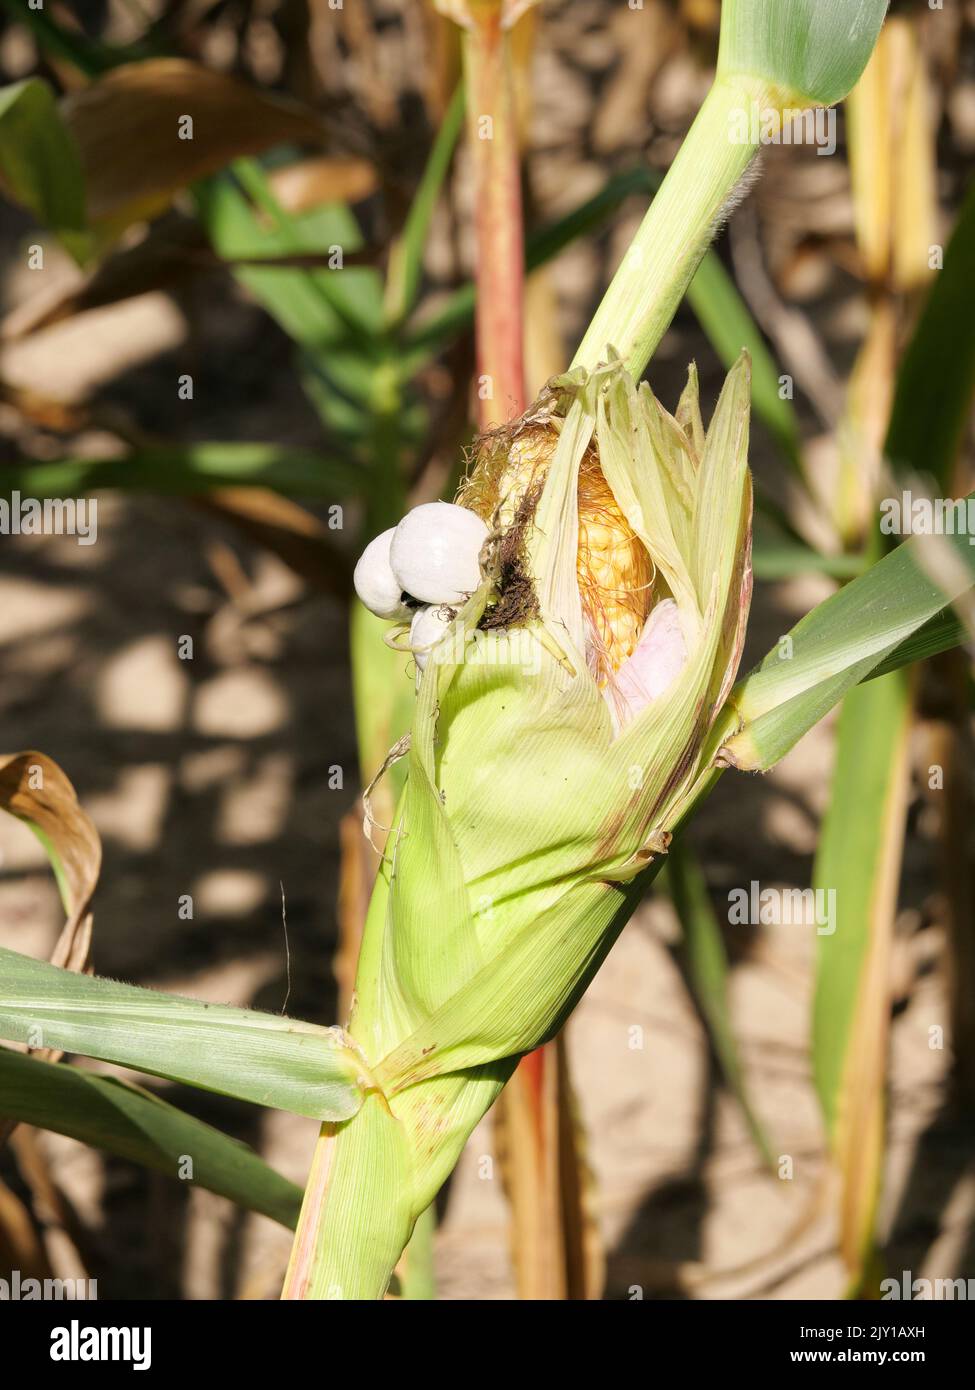 Young silver-grey smuts, corn smut sporangia on corn cobs Stock Photo